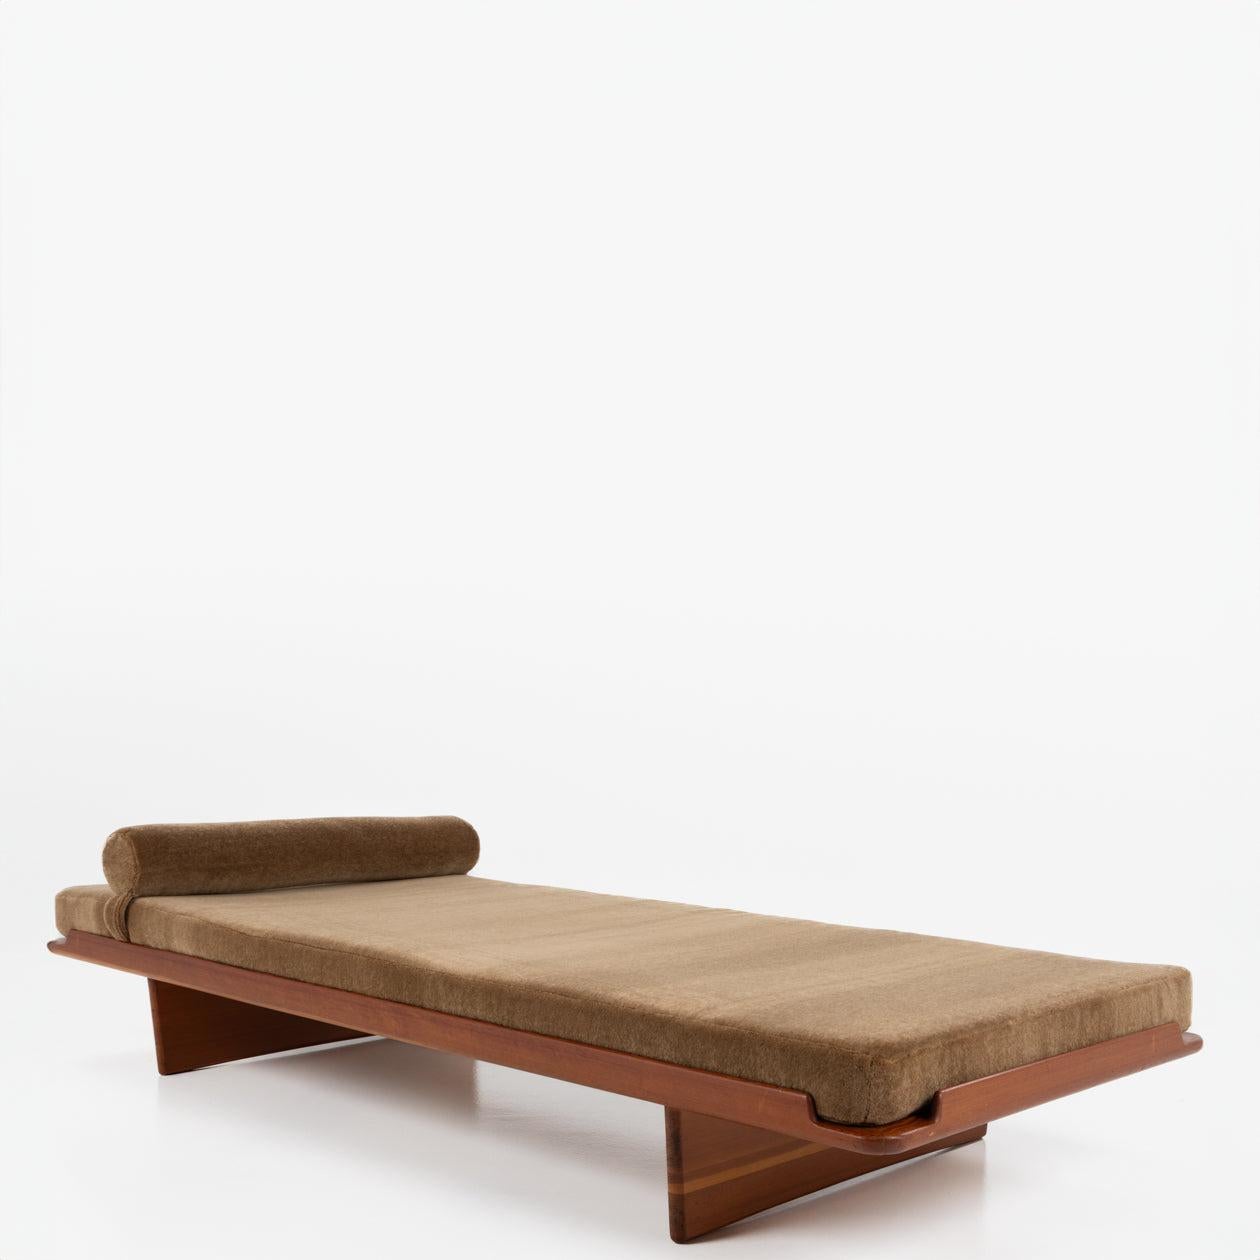 European GJ Daybed in Oregon pine by Grete Jalk